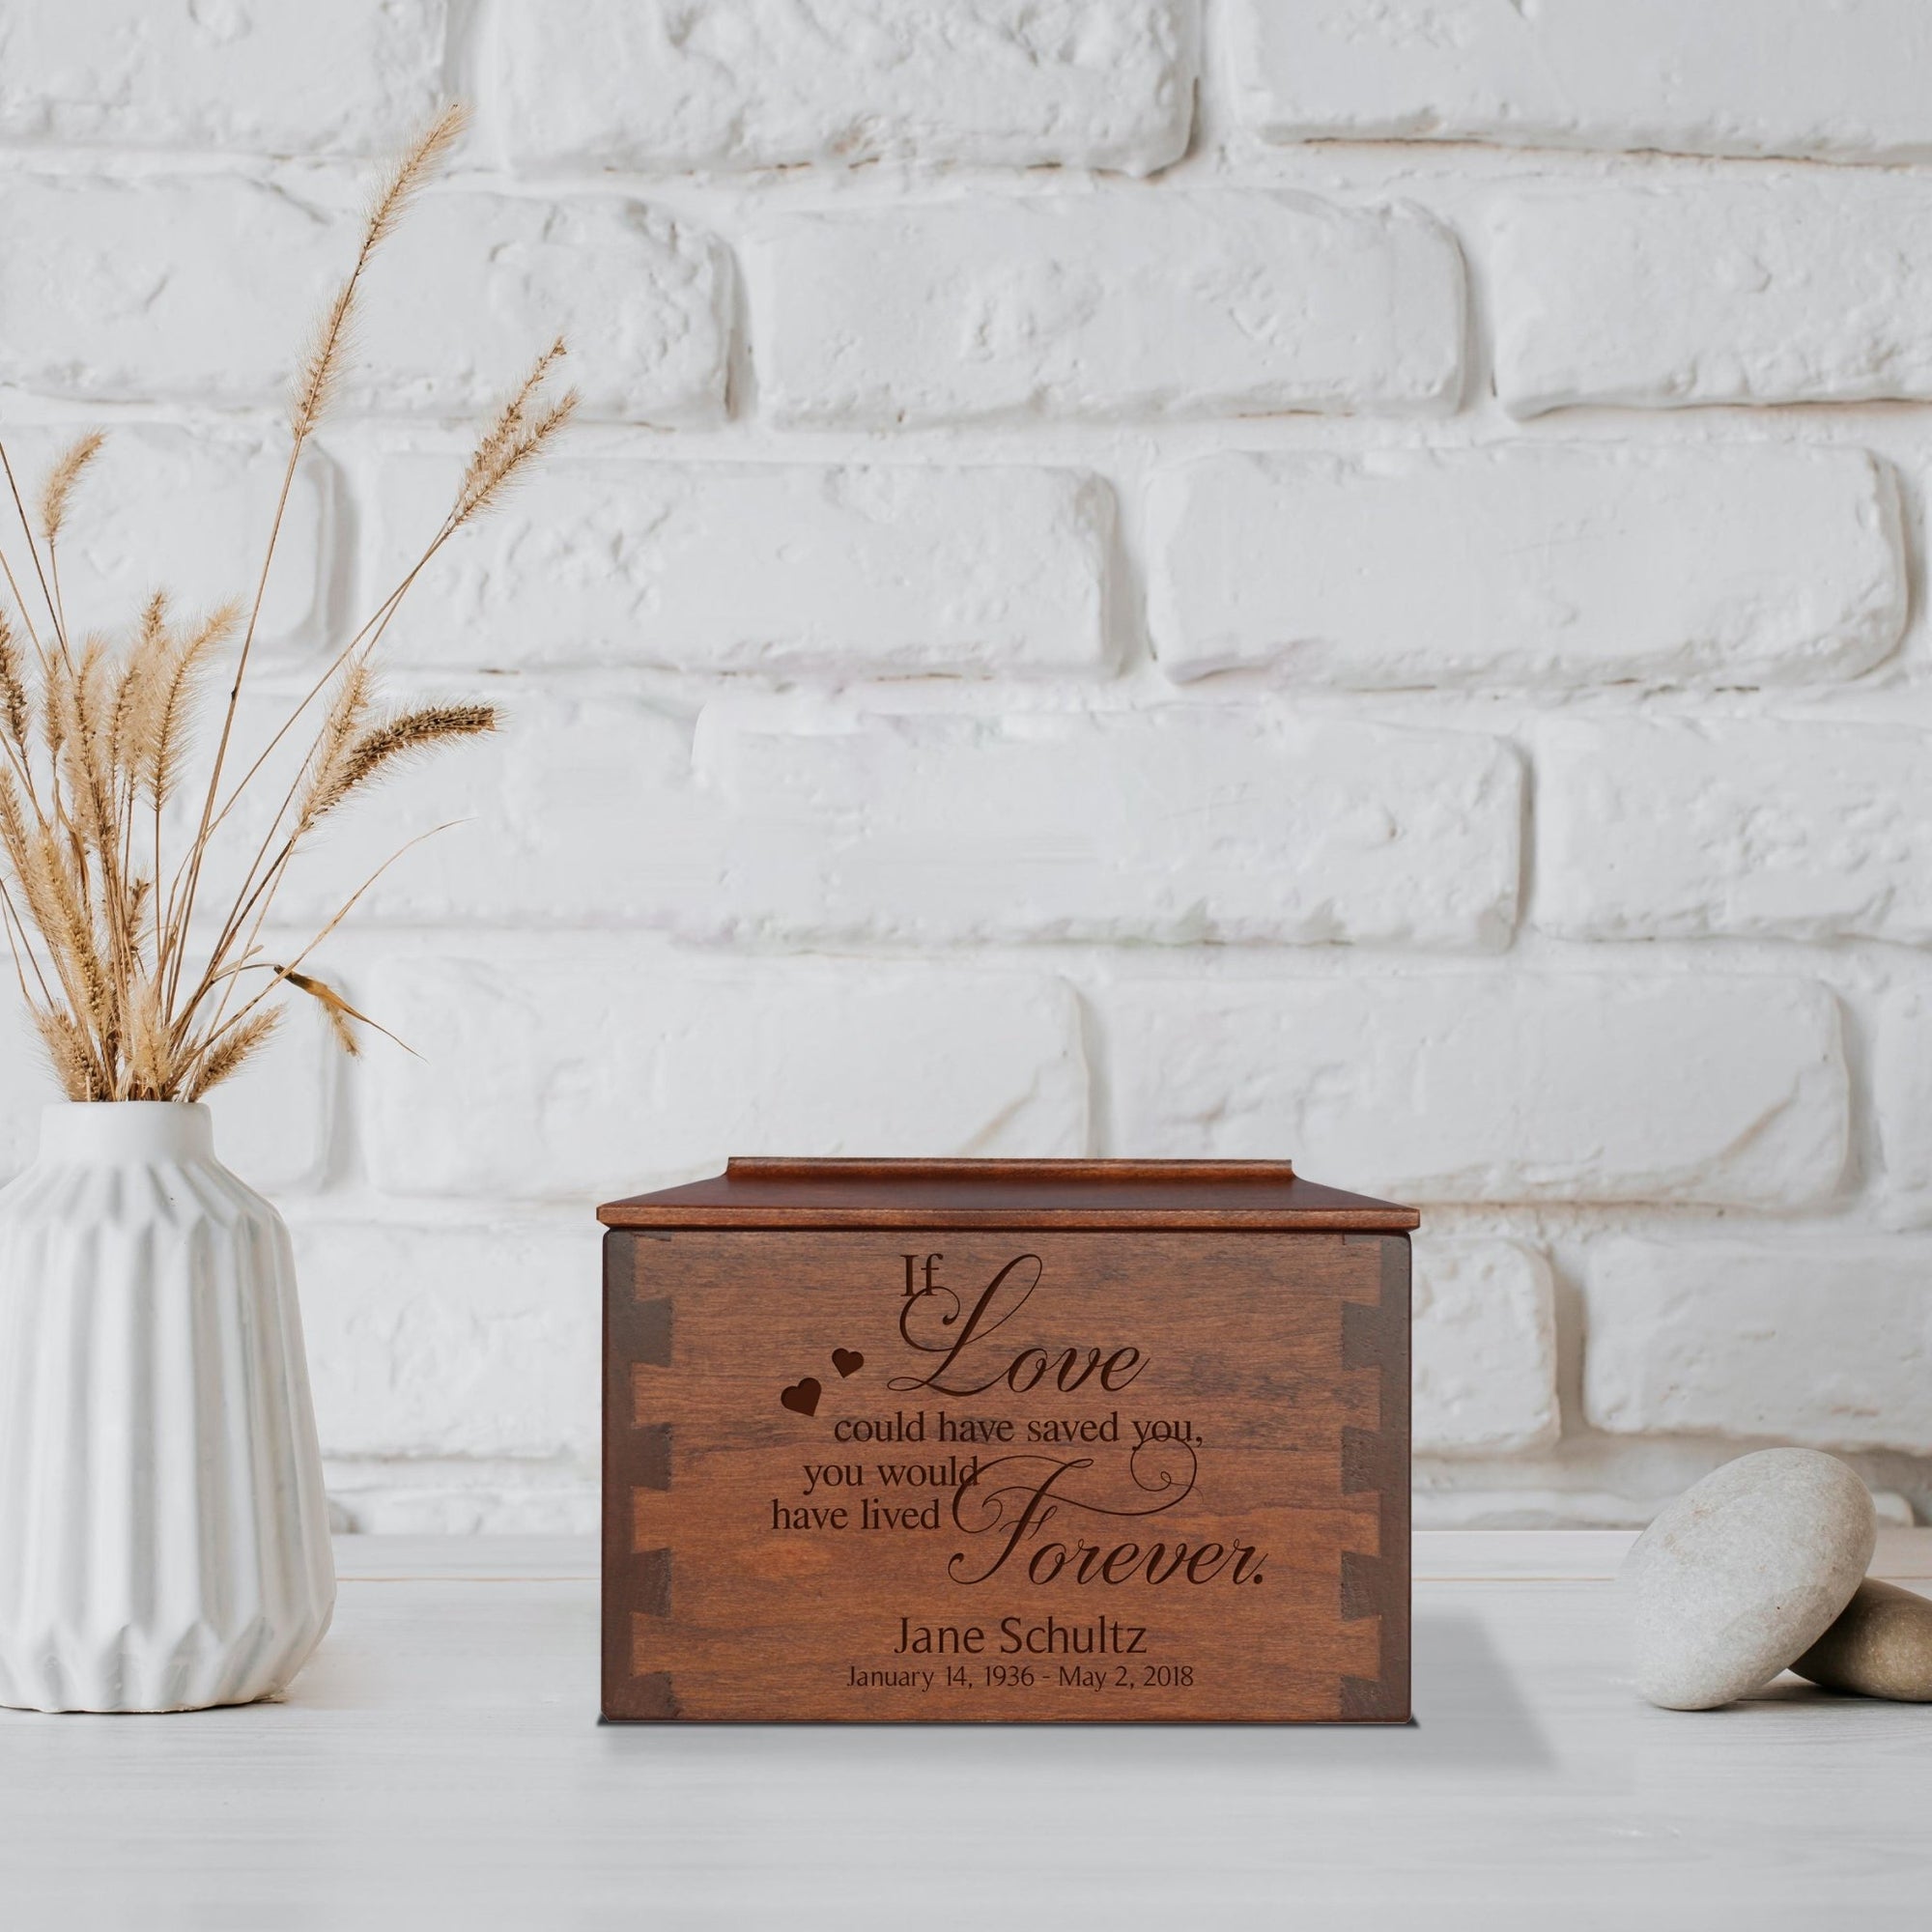 Custom Wooden Cremation Urn Box Small for Human Ashes holds 68 cu in If Love Could Have - LifeSong Milestones